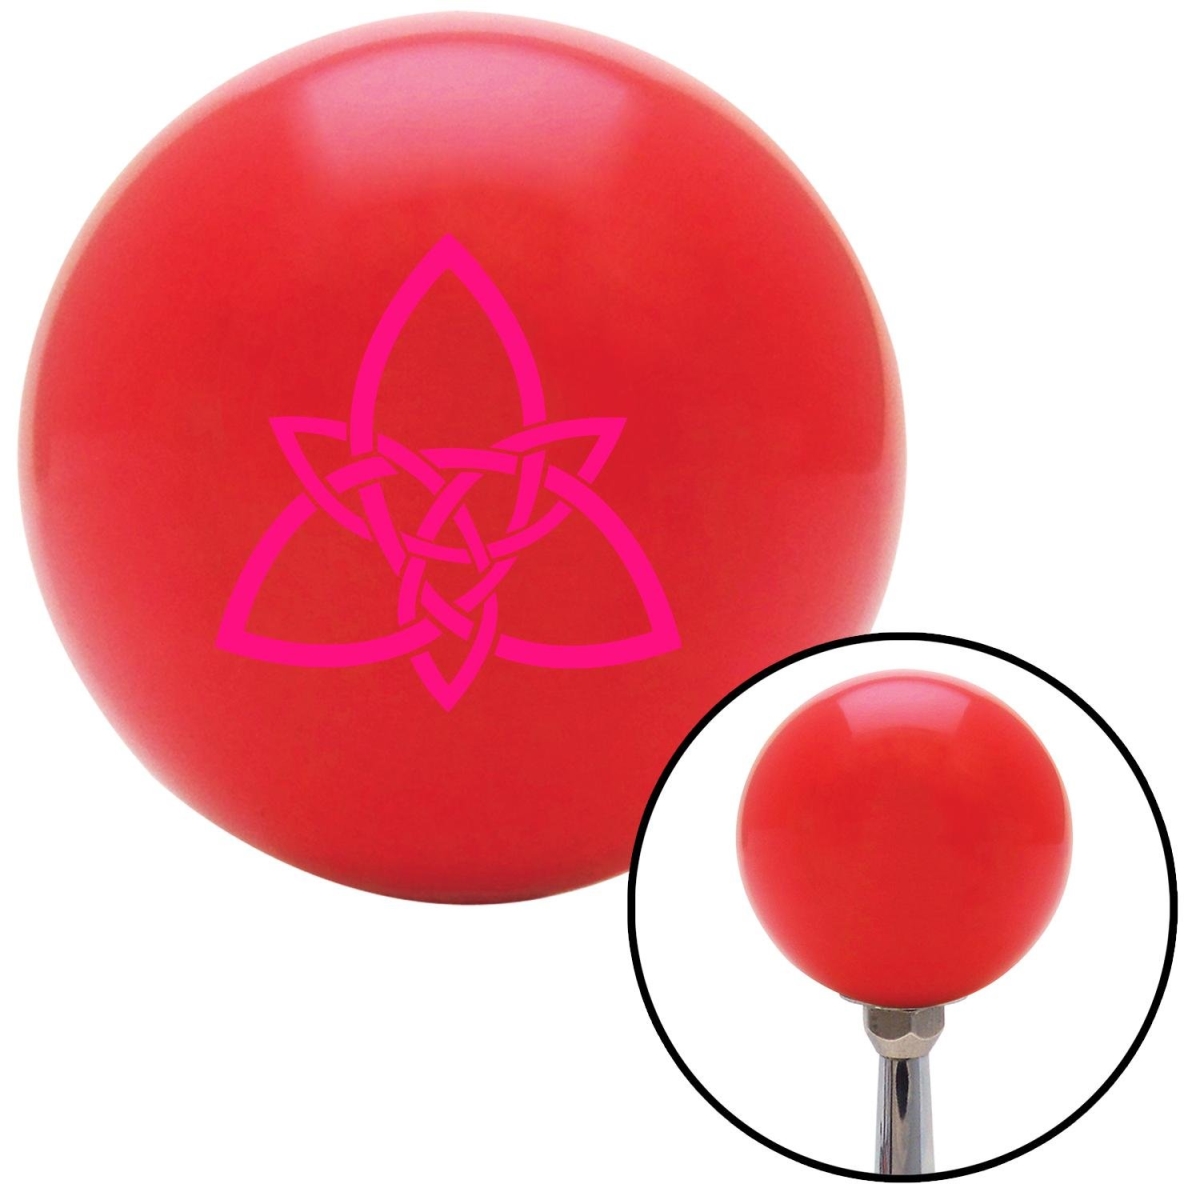 Picture of American Shifter 101593 Pink Celtic Design No.3 Red Shift Knob with M16 x 1.5 Insert Shifter Auto Manual Brody